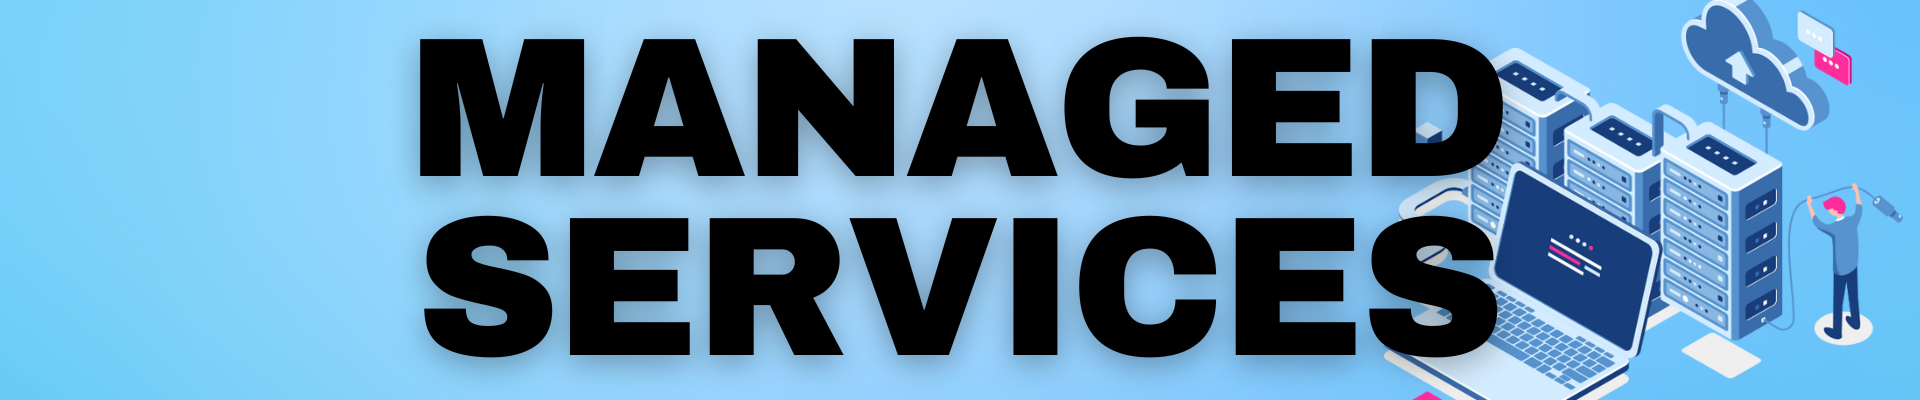 Managed Services Image